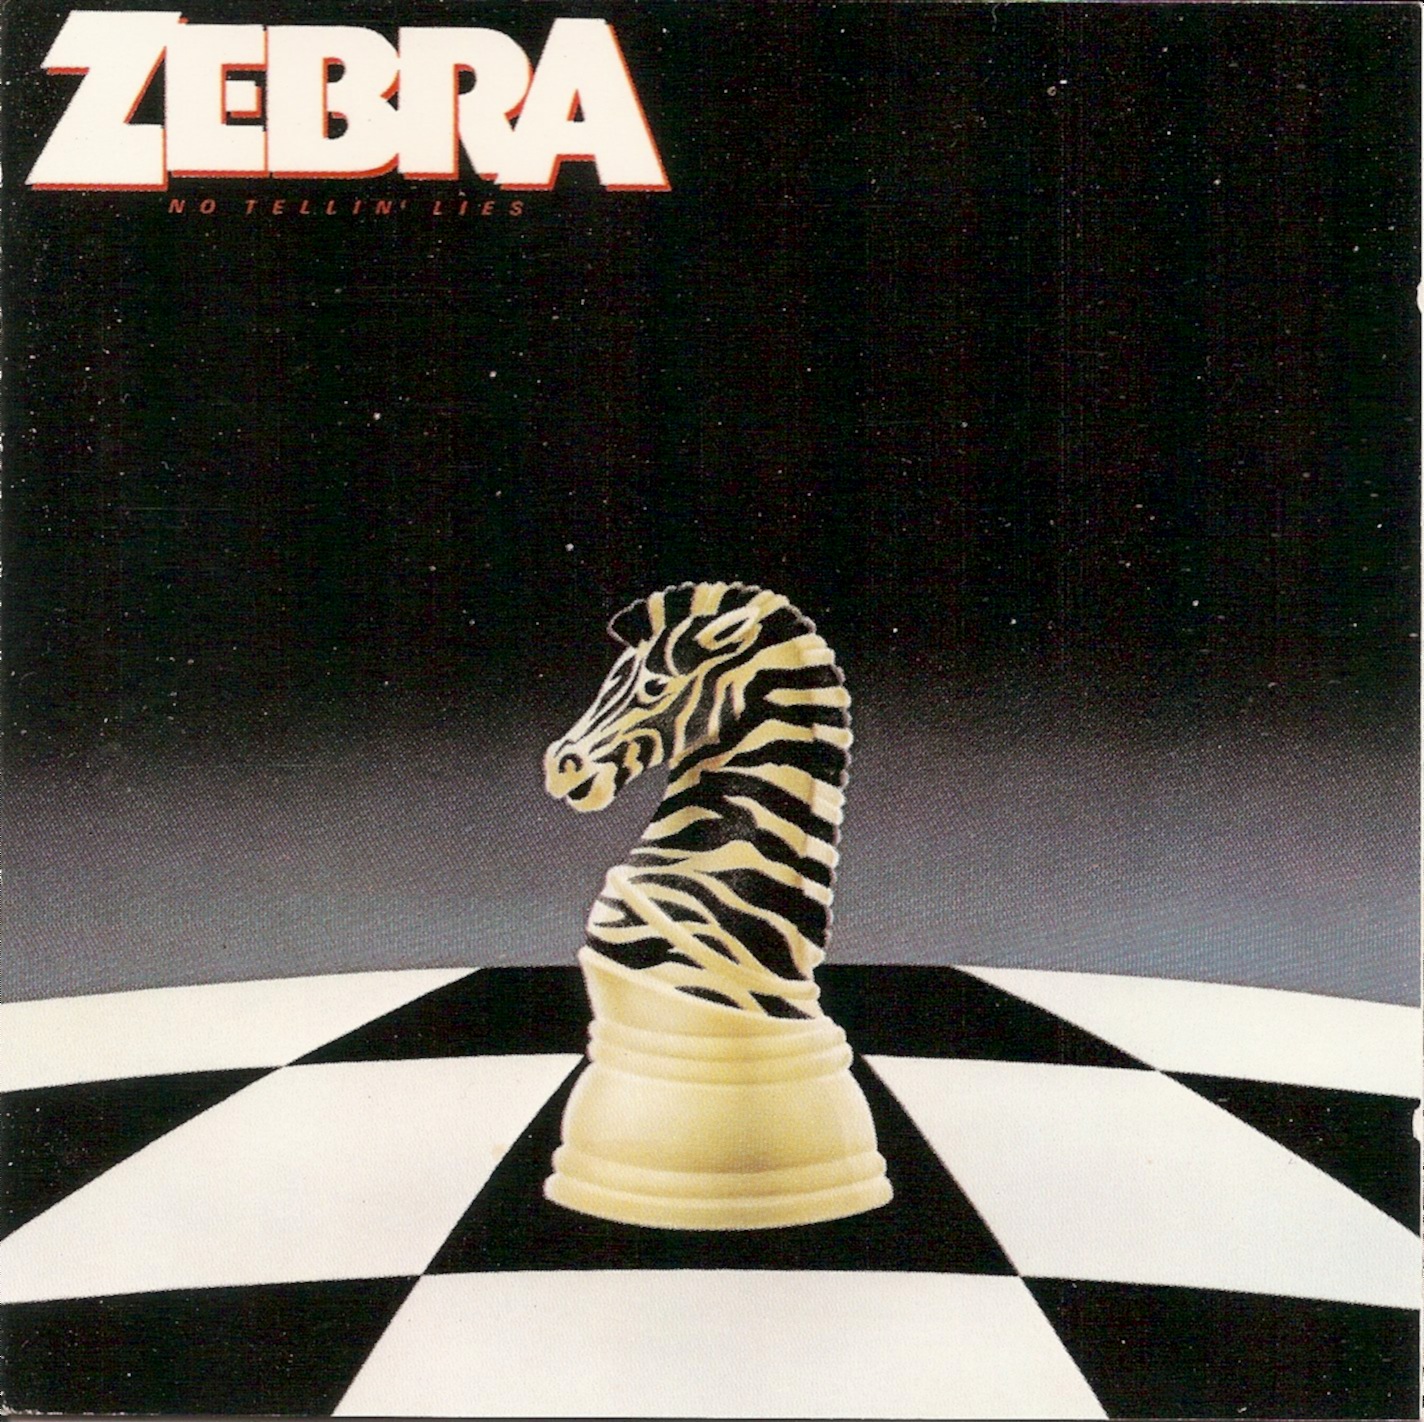 The Target CD Collection: Zebra